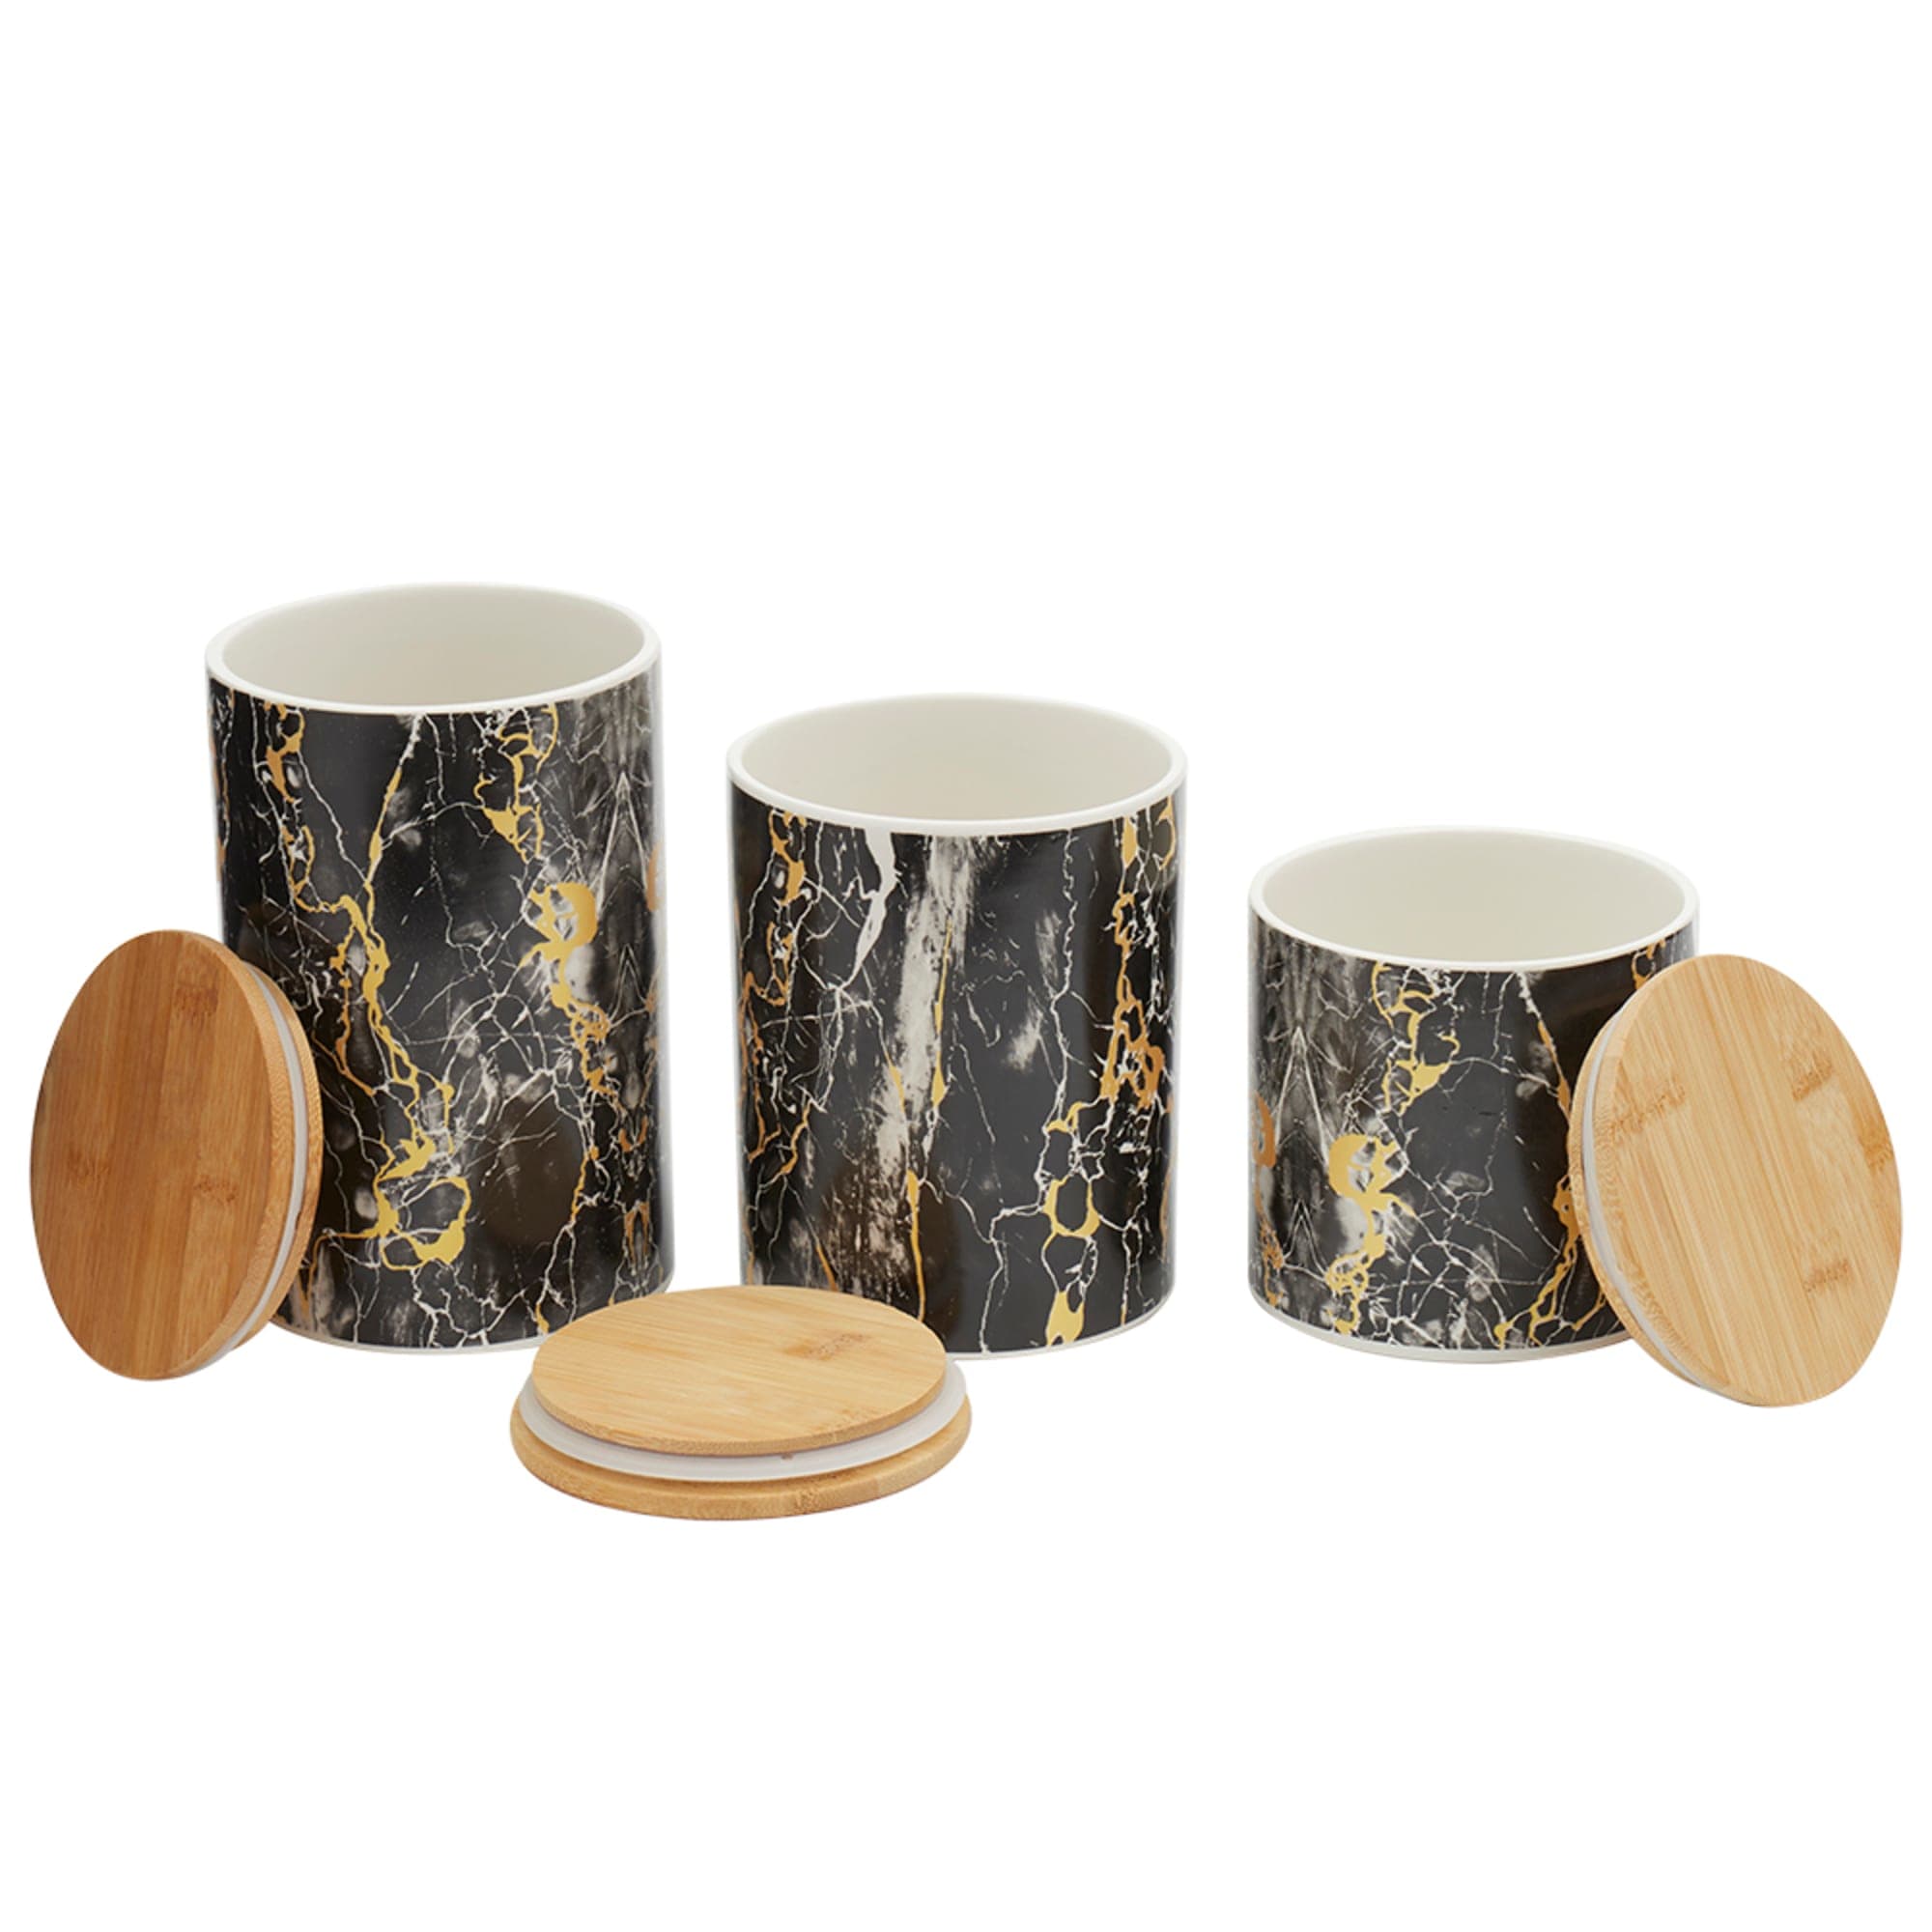 Home Basics Printed Marble 3 Piece Ceramic Canister Set with Bamboo Top, Black $20.00 EACH, CASE PACK OF 3